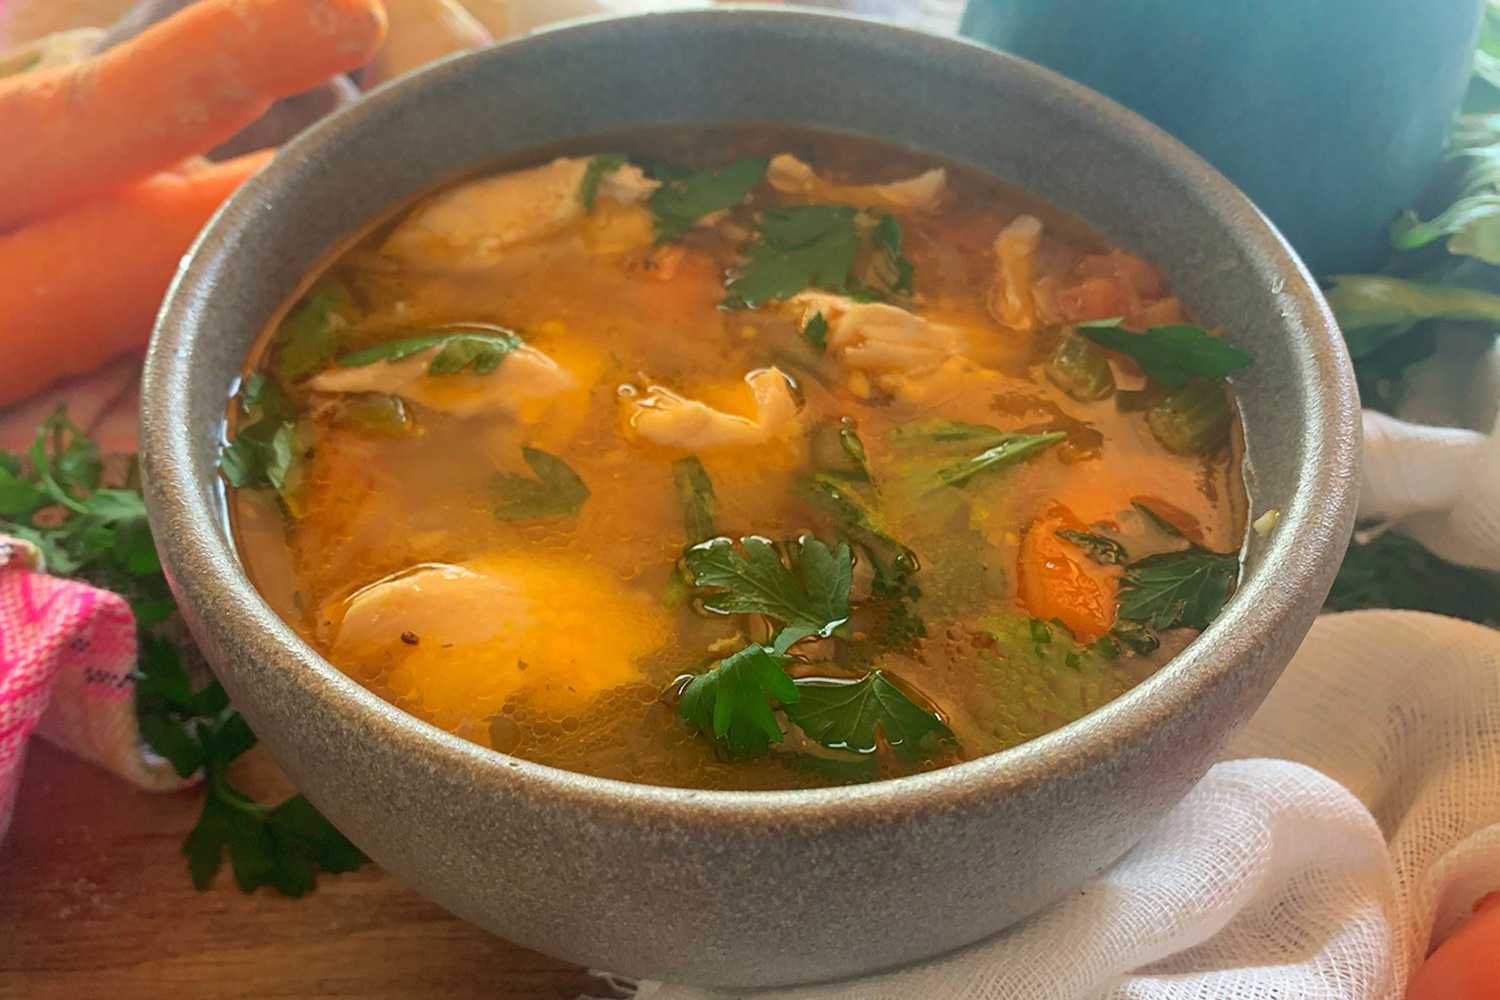 Fresh soup with salmon, carrot cubes and parsley in a grey bowl